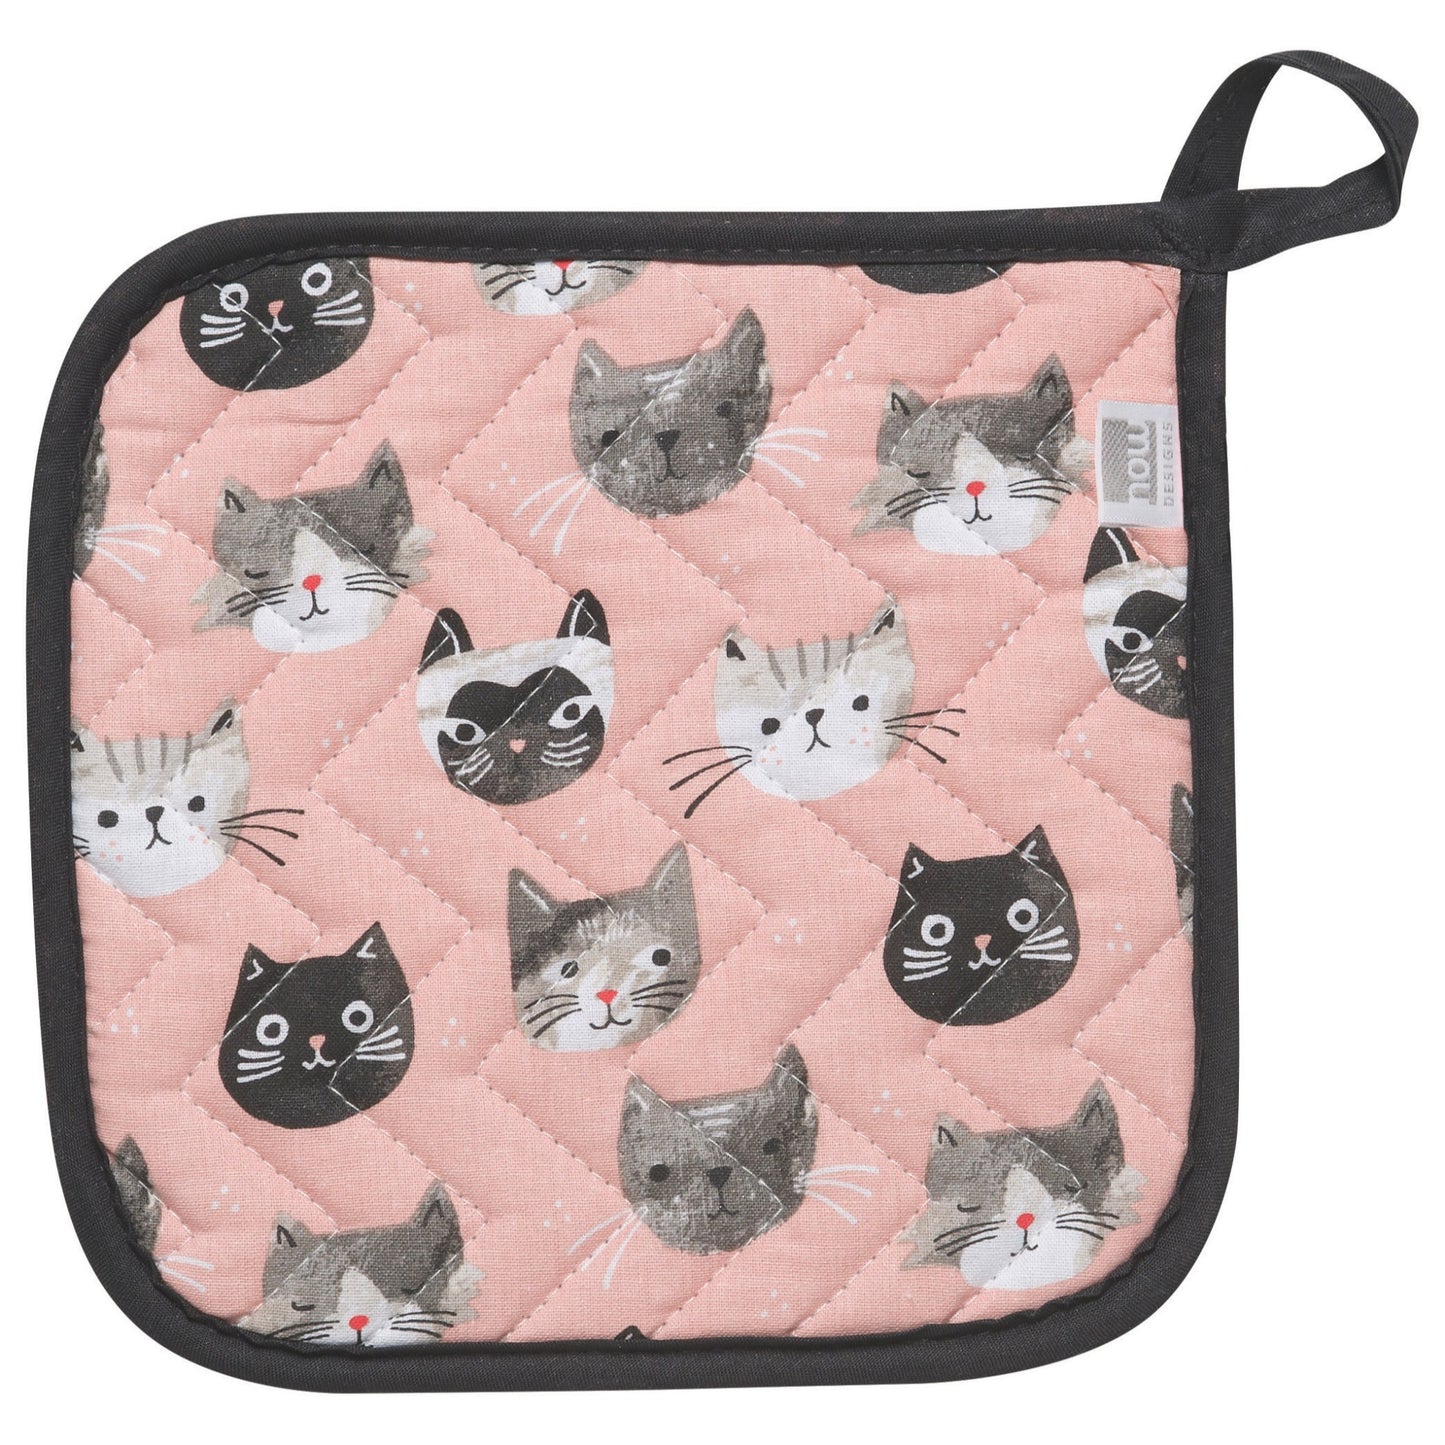 "The Cats Meow": Potholder - Tiny Tiger Gift Shop